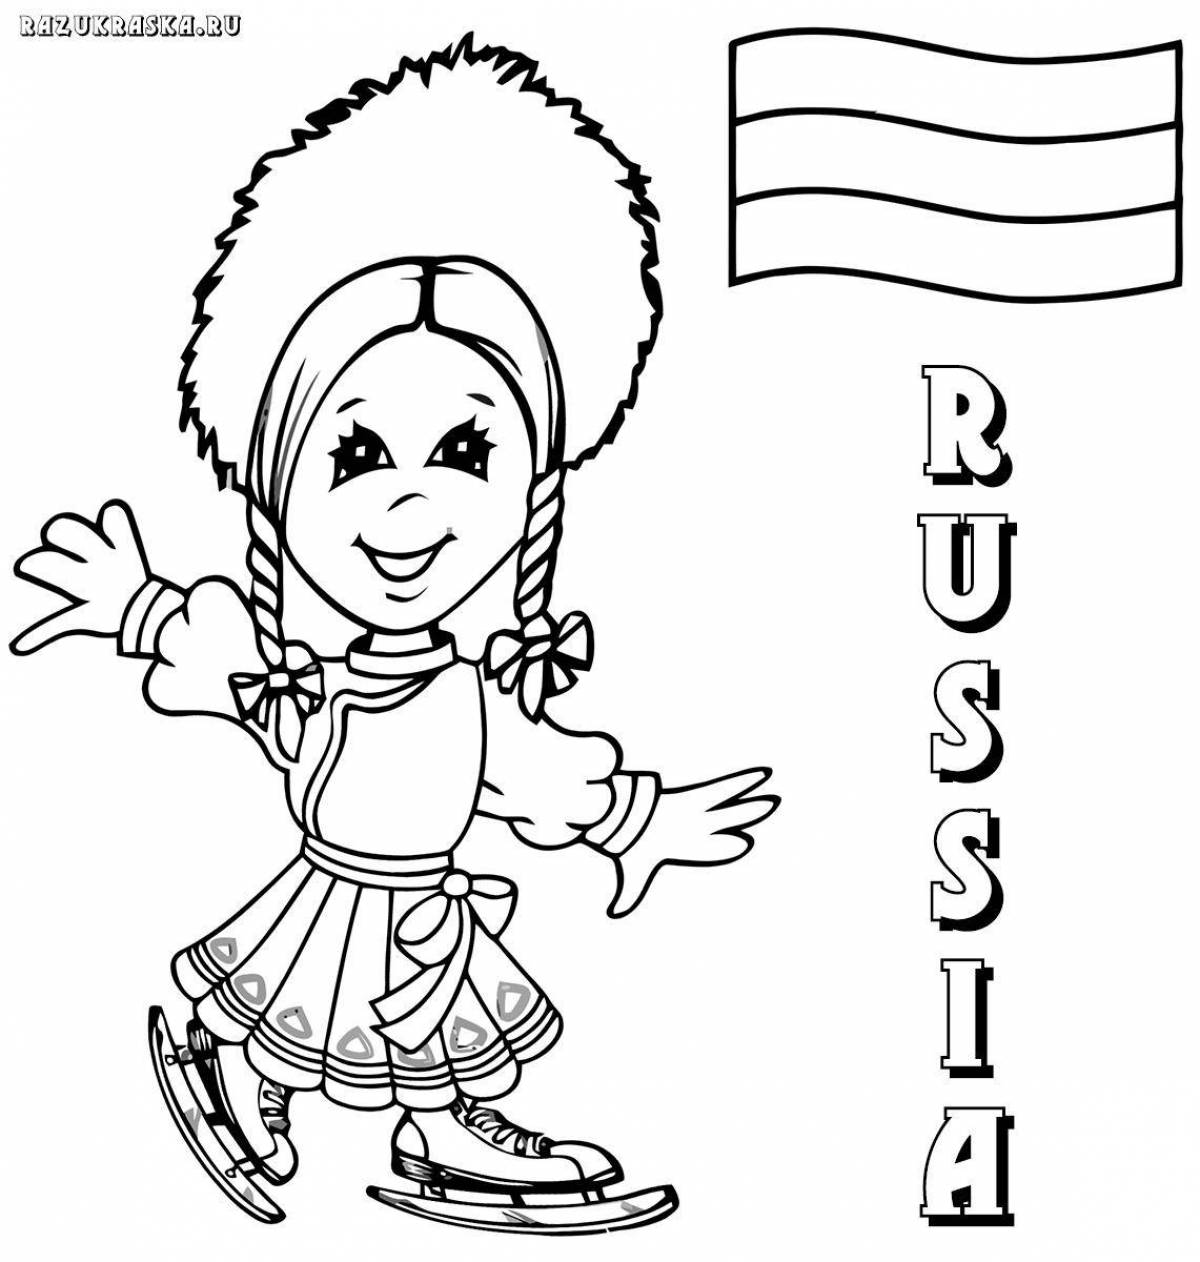 Coloring day of great russia